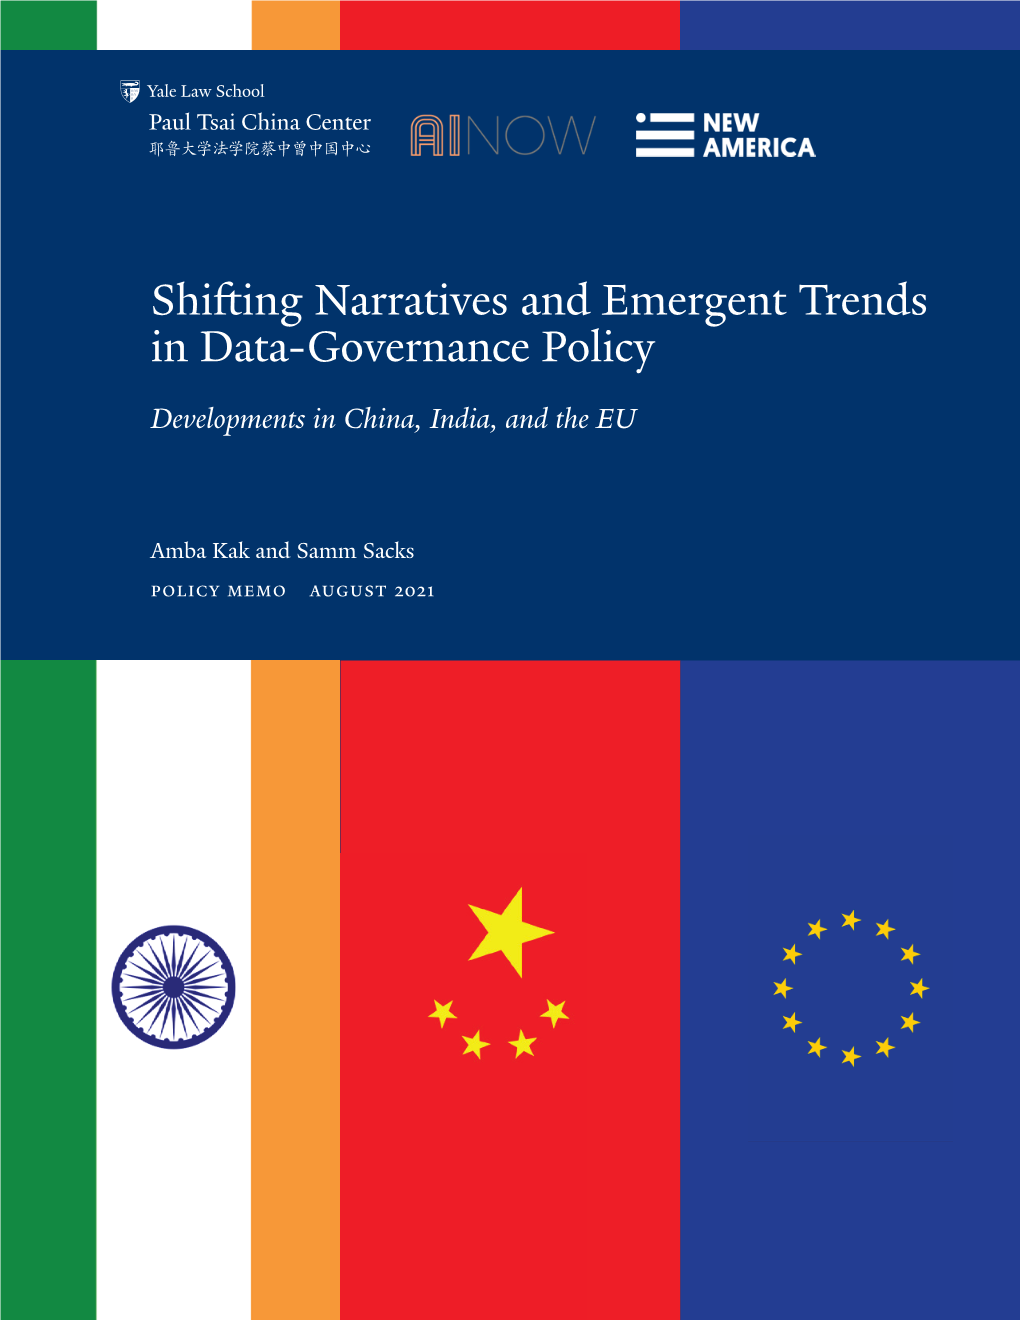 Shifting Narratives and Emergent Trends in Data-Governance Policy